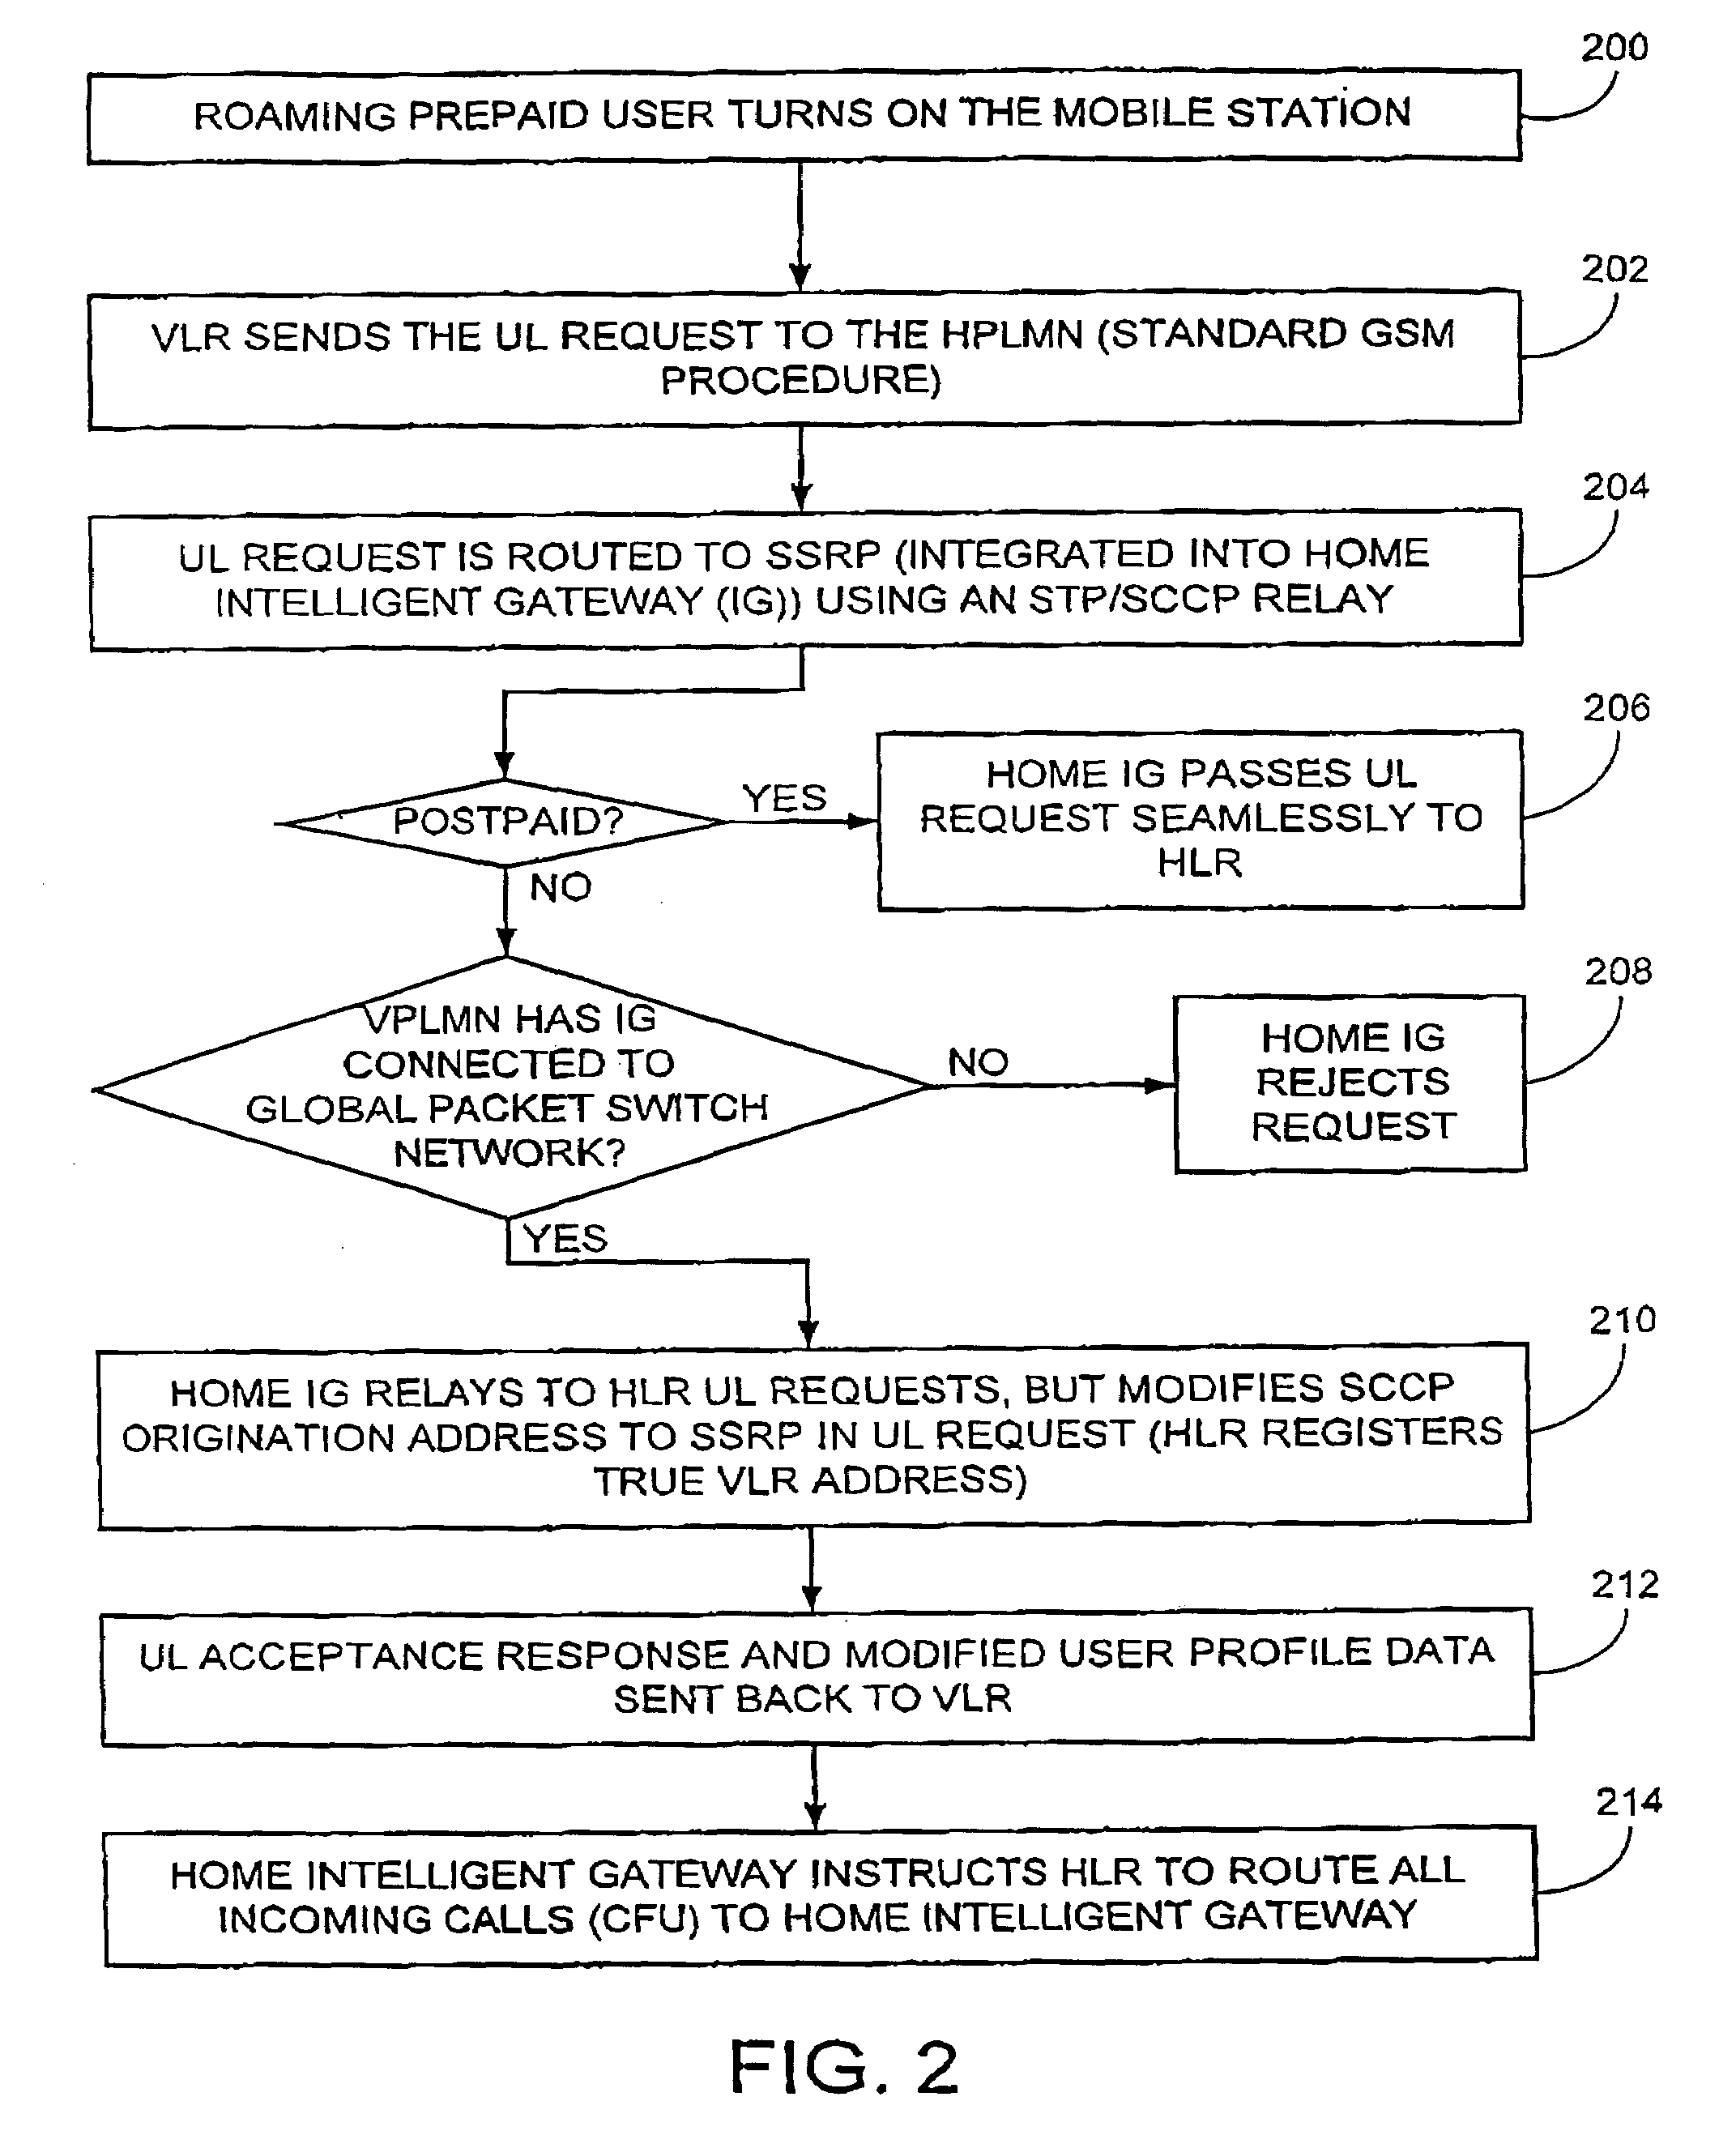 System and method for roaming for prepaid mobile telephone service